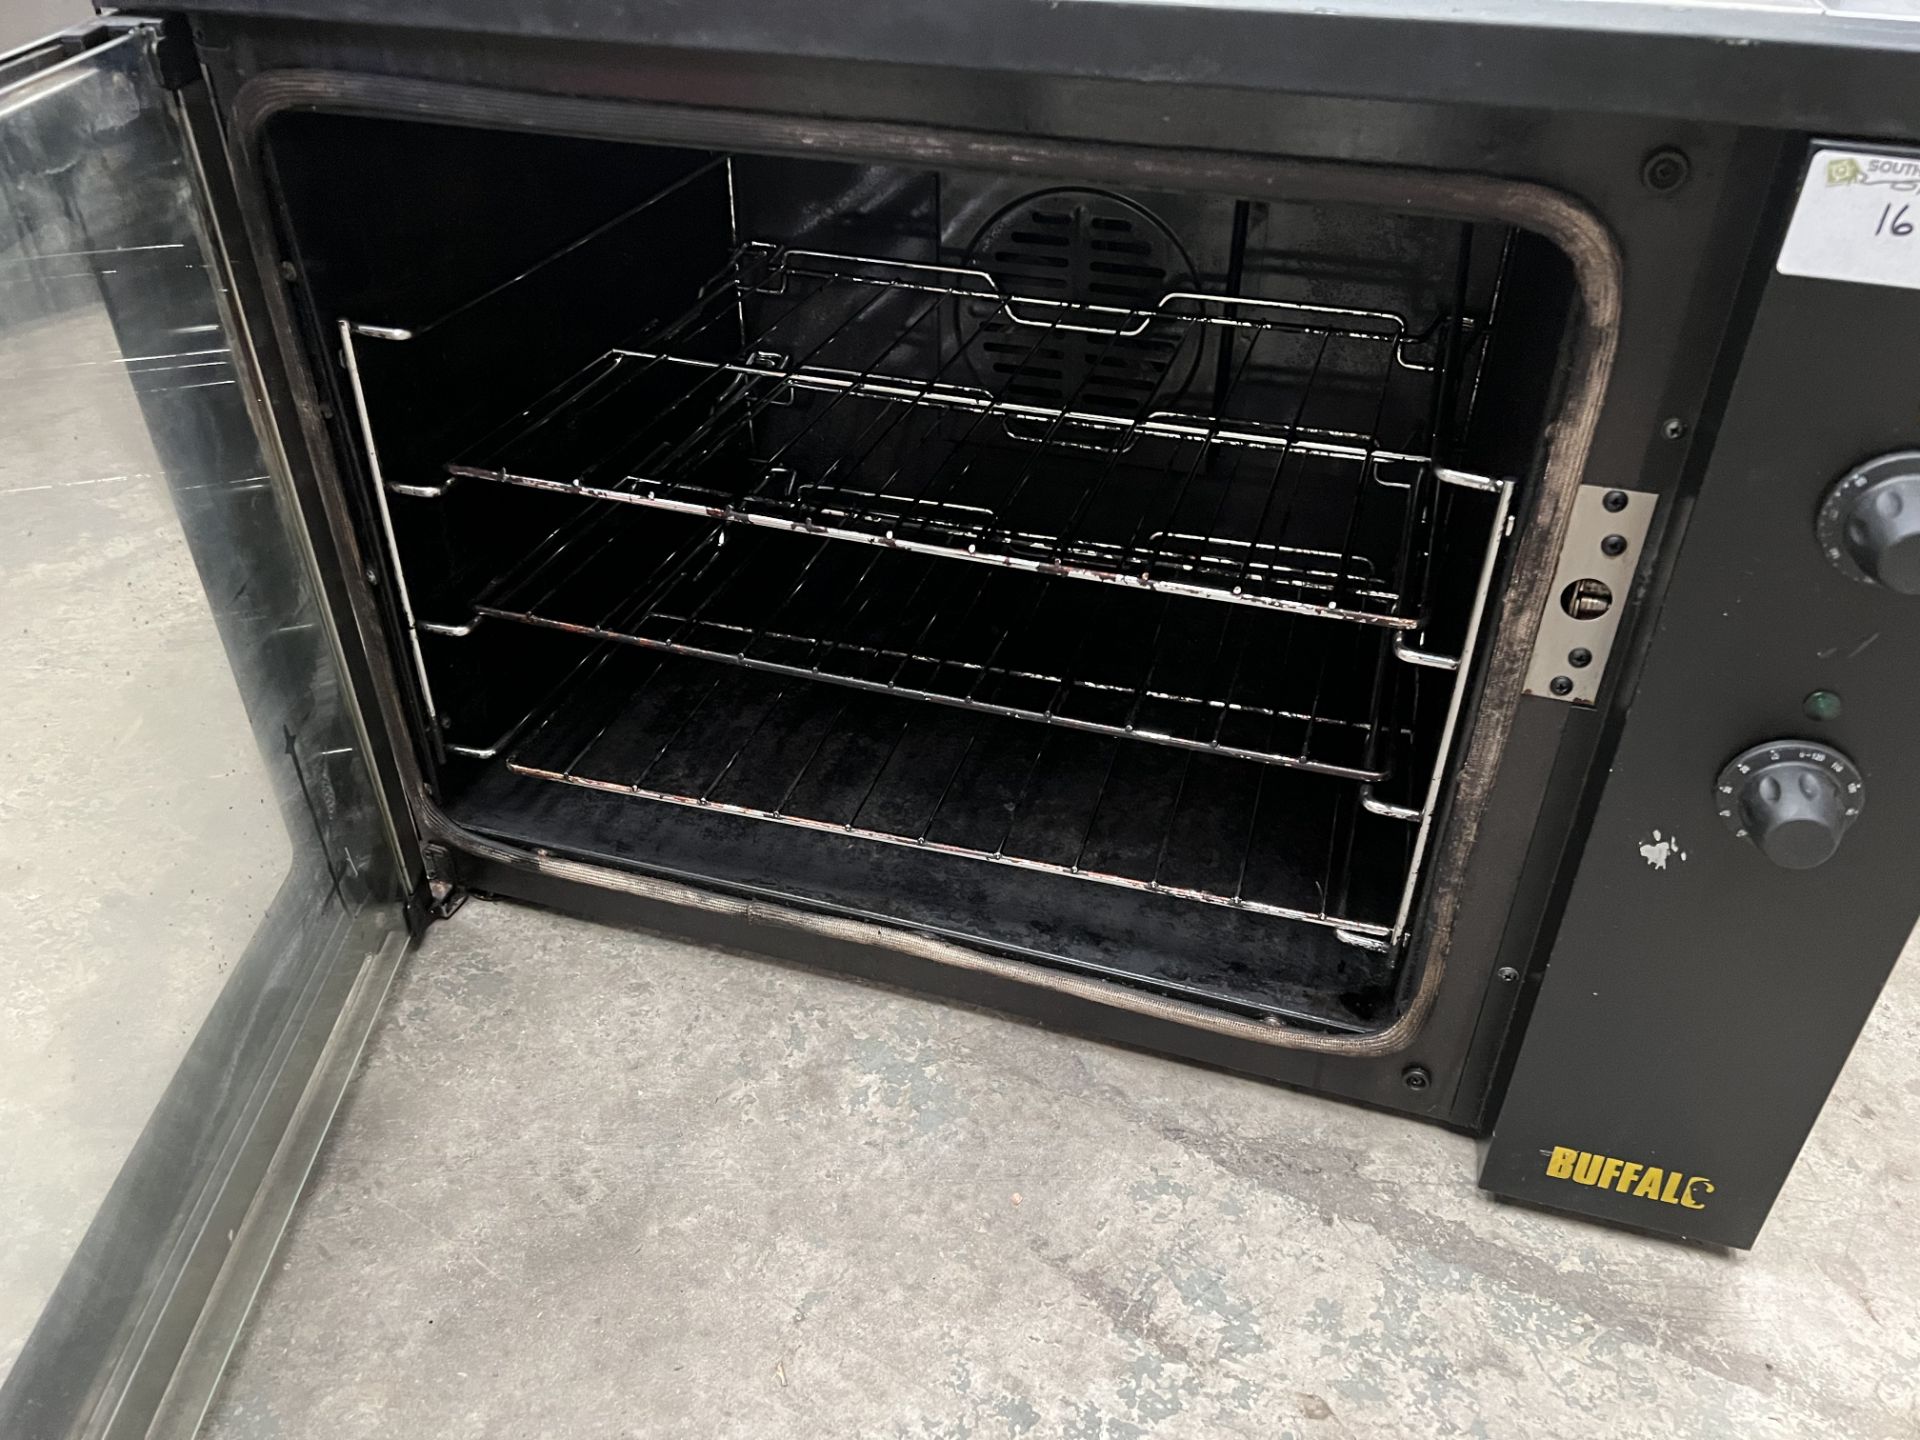 Buffalo 13 amp Convection Oven - Image 2 of 2